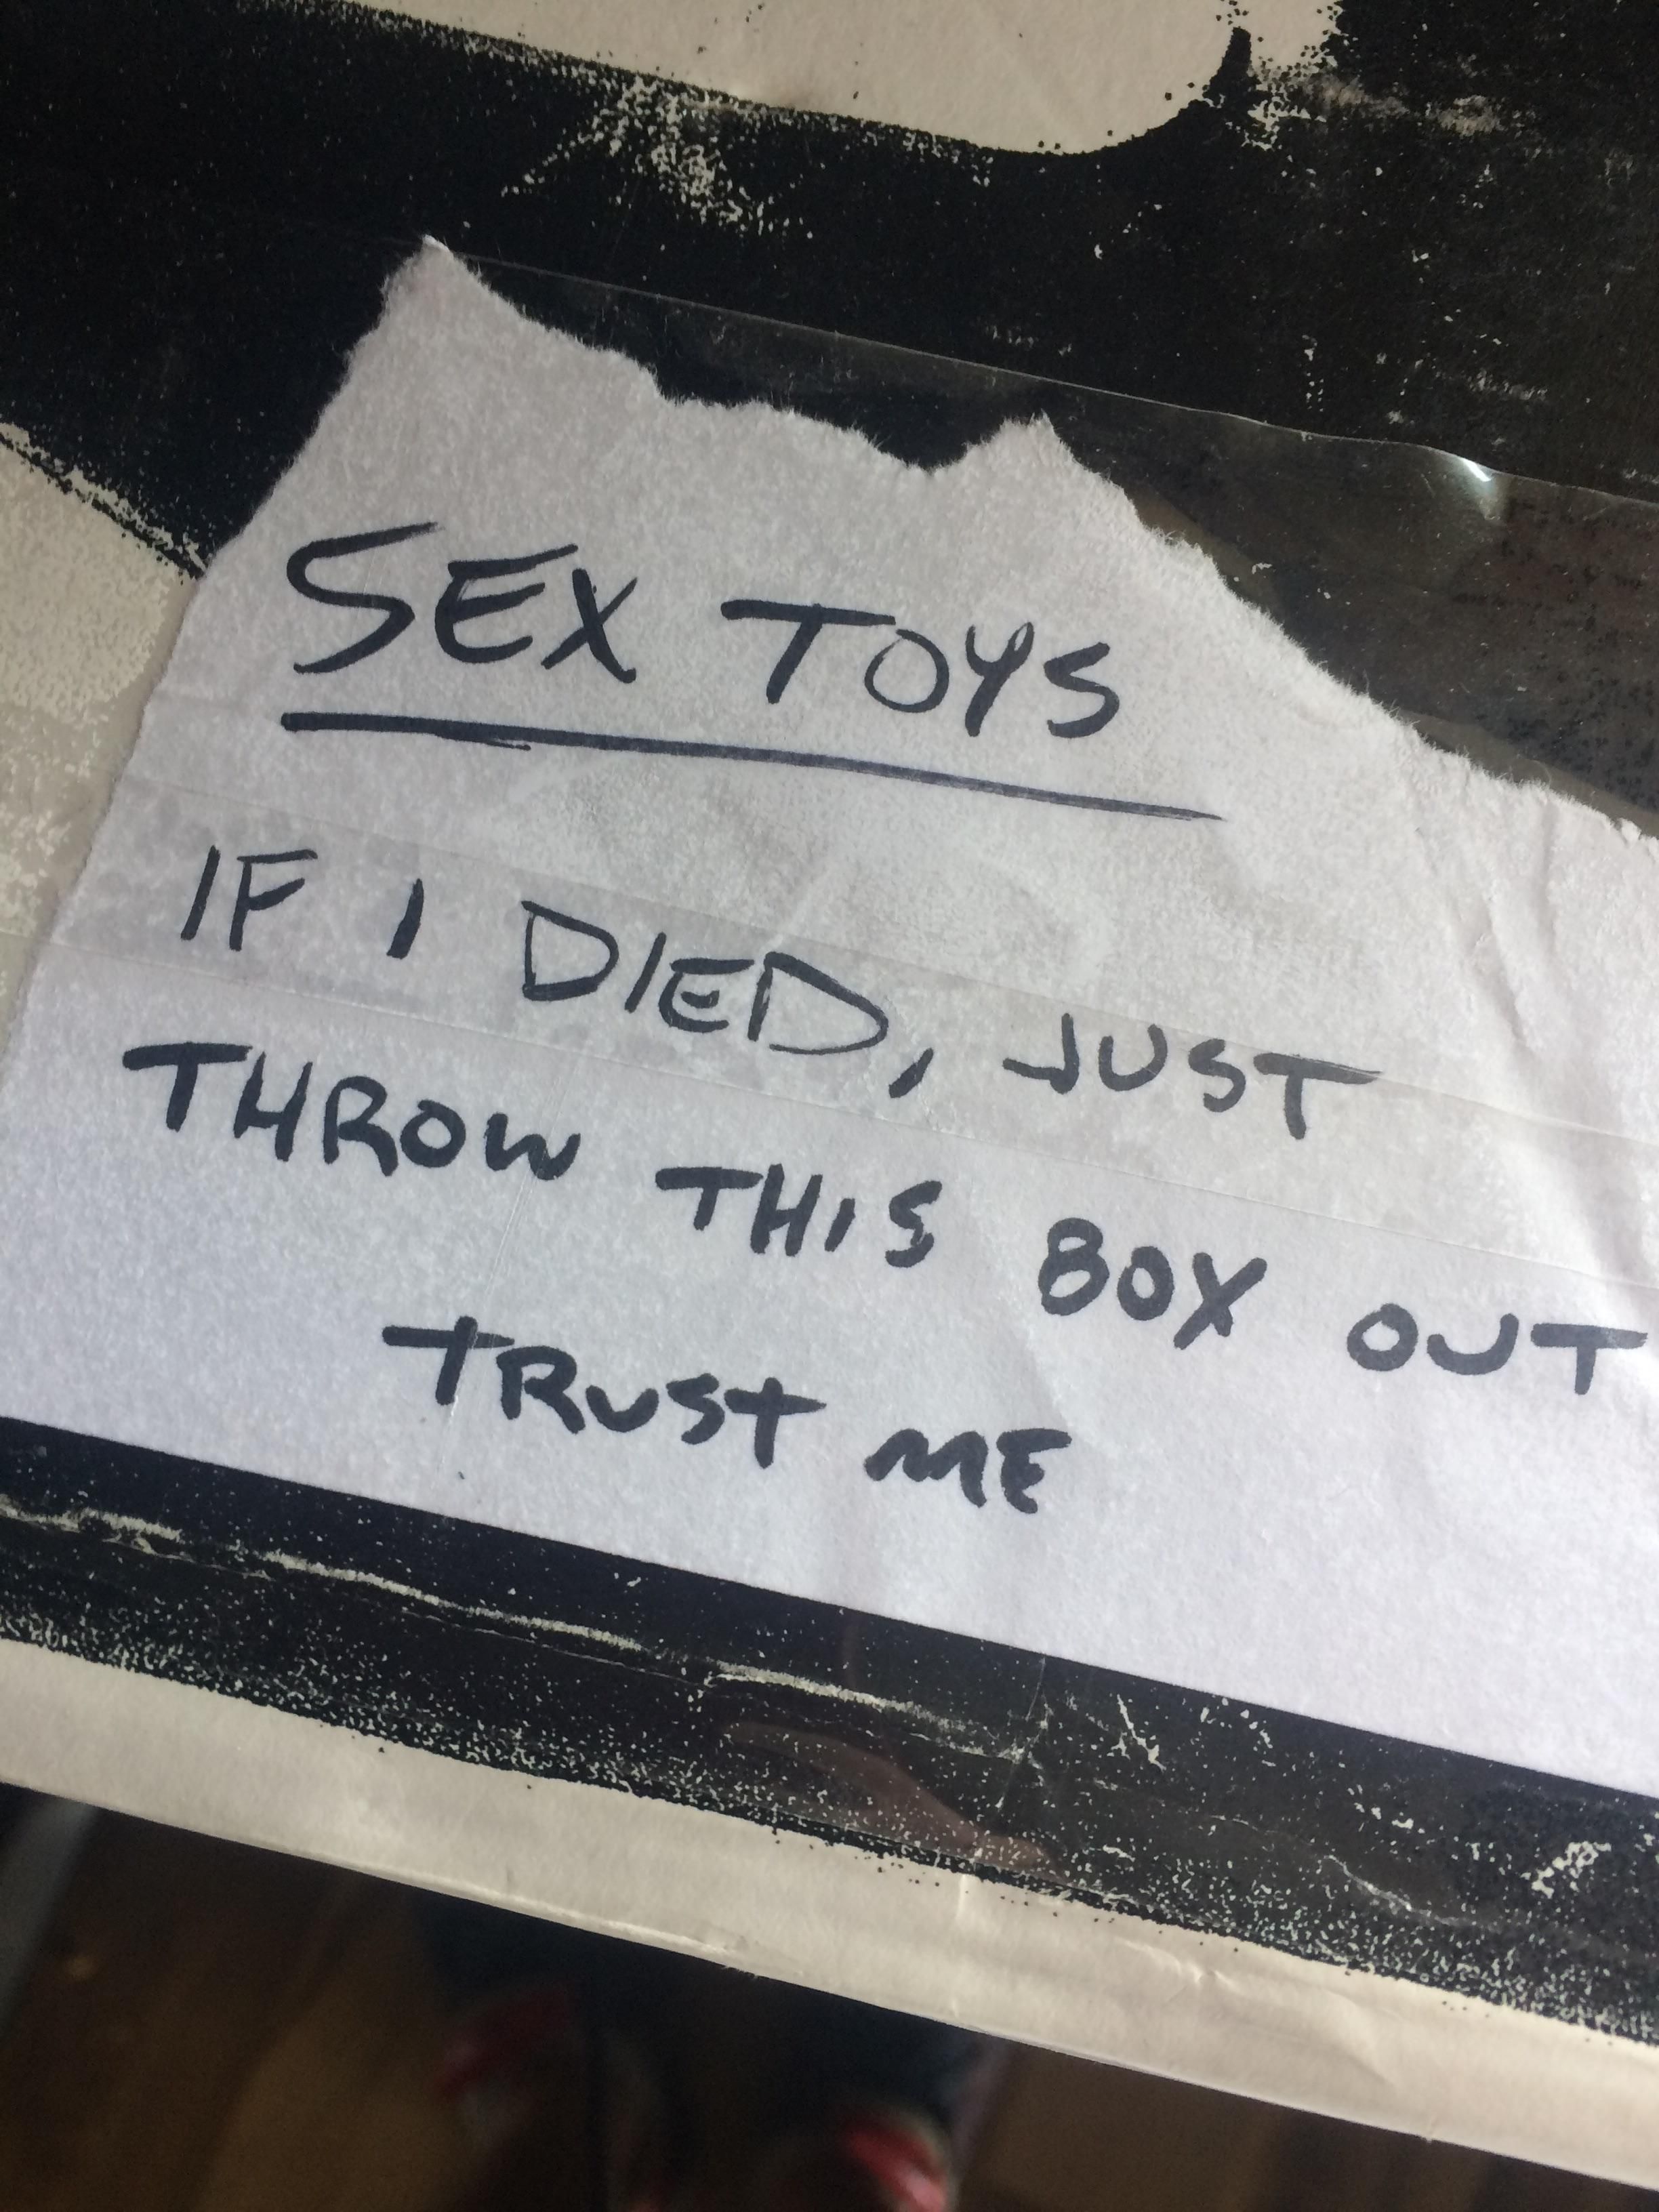 LPT: When packing up for a move, always properly label your sex toys.